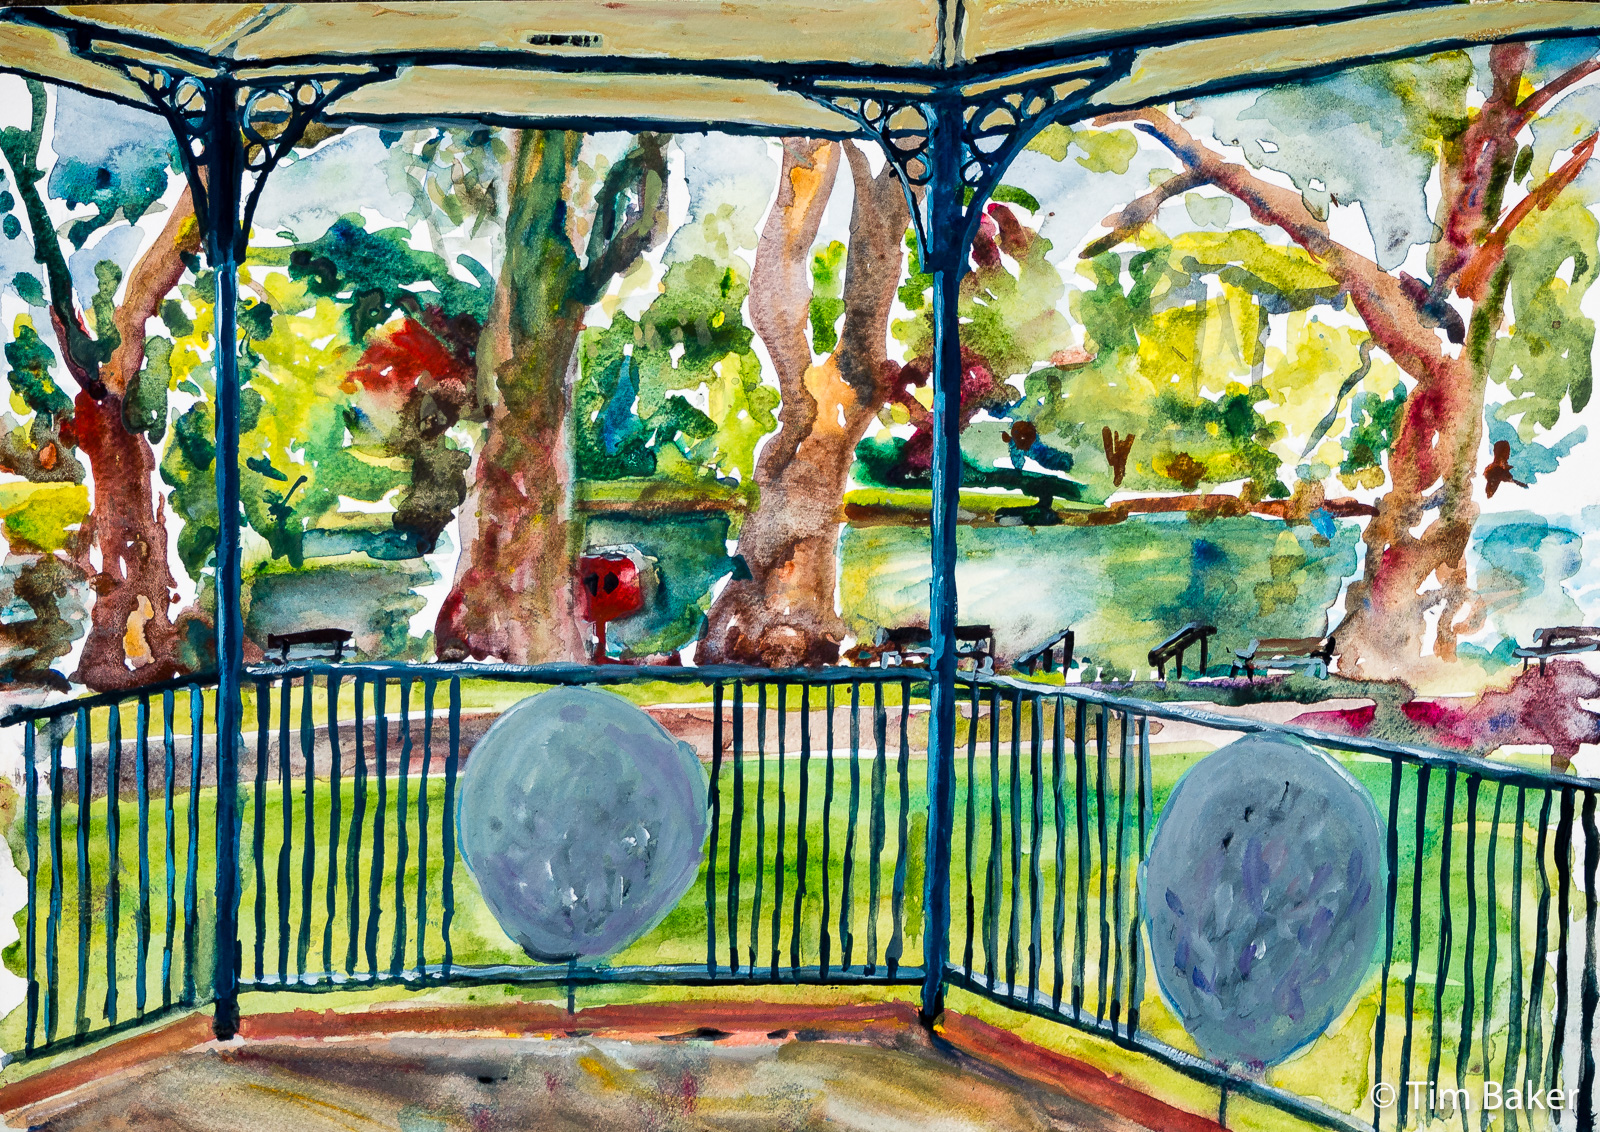 Canbury Bandstand (final). Watercolour and Gouache, A3 - SOLD